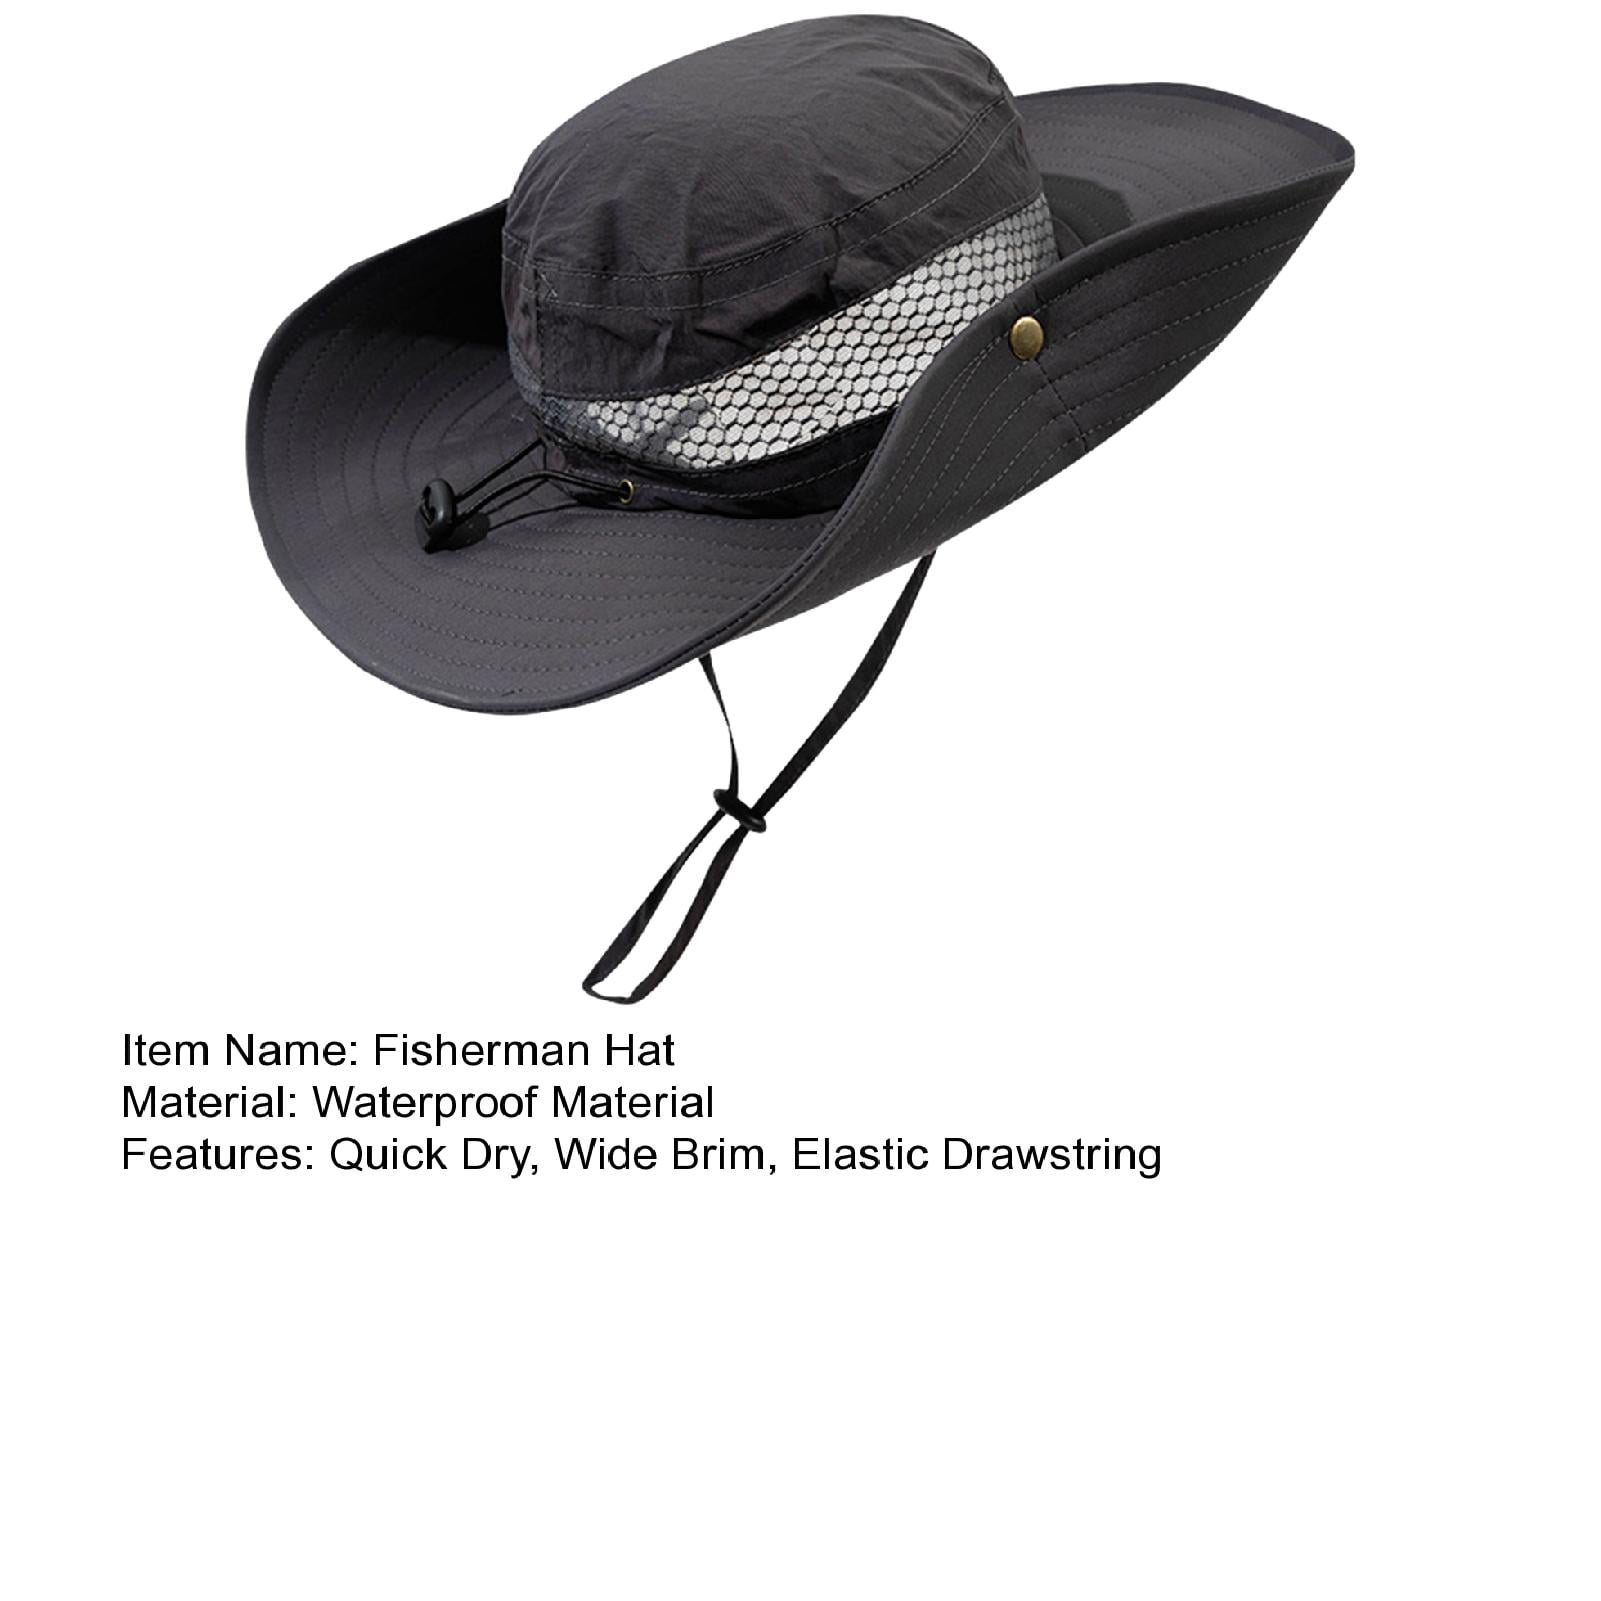 Fashion Bucket Hat Man Fishing Hiking Cowboy Hat Quick-Drying Letter Fisherman  Hat Outdoor UV Sun Protection Breathable Cap-XMZ73-Black 